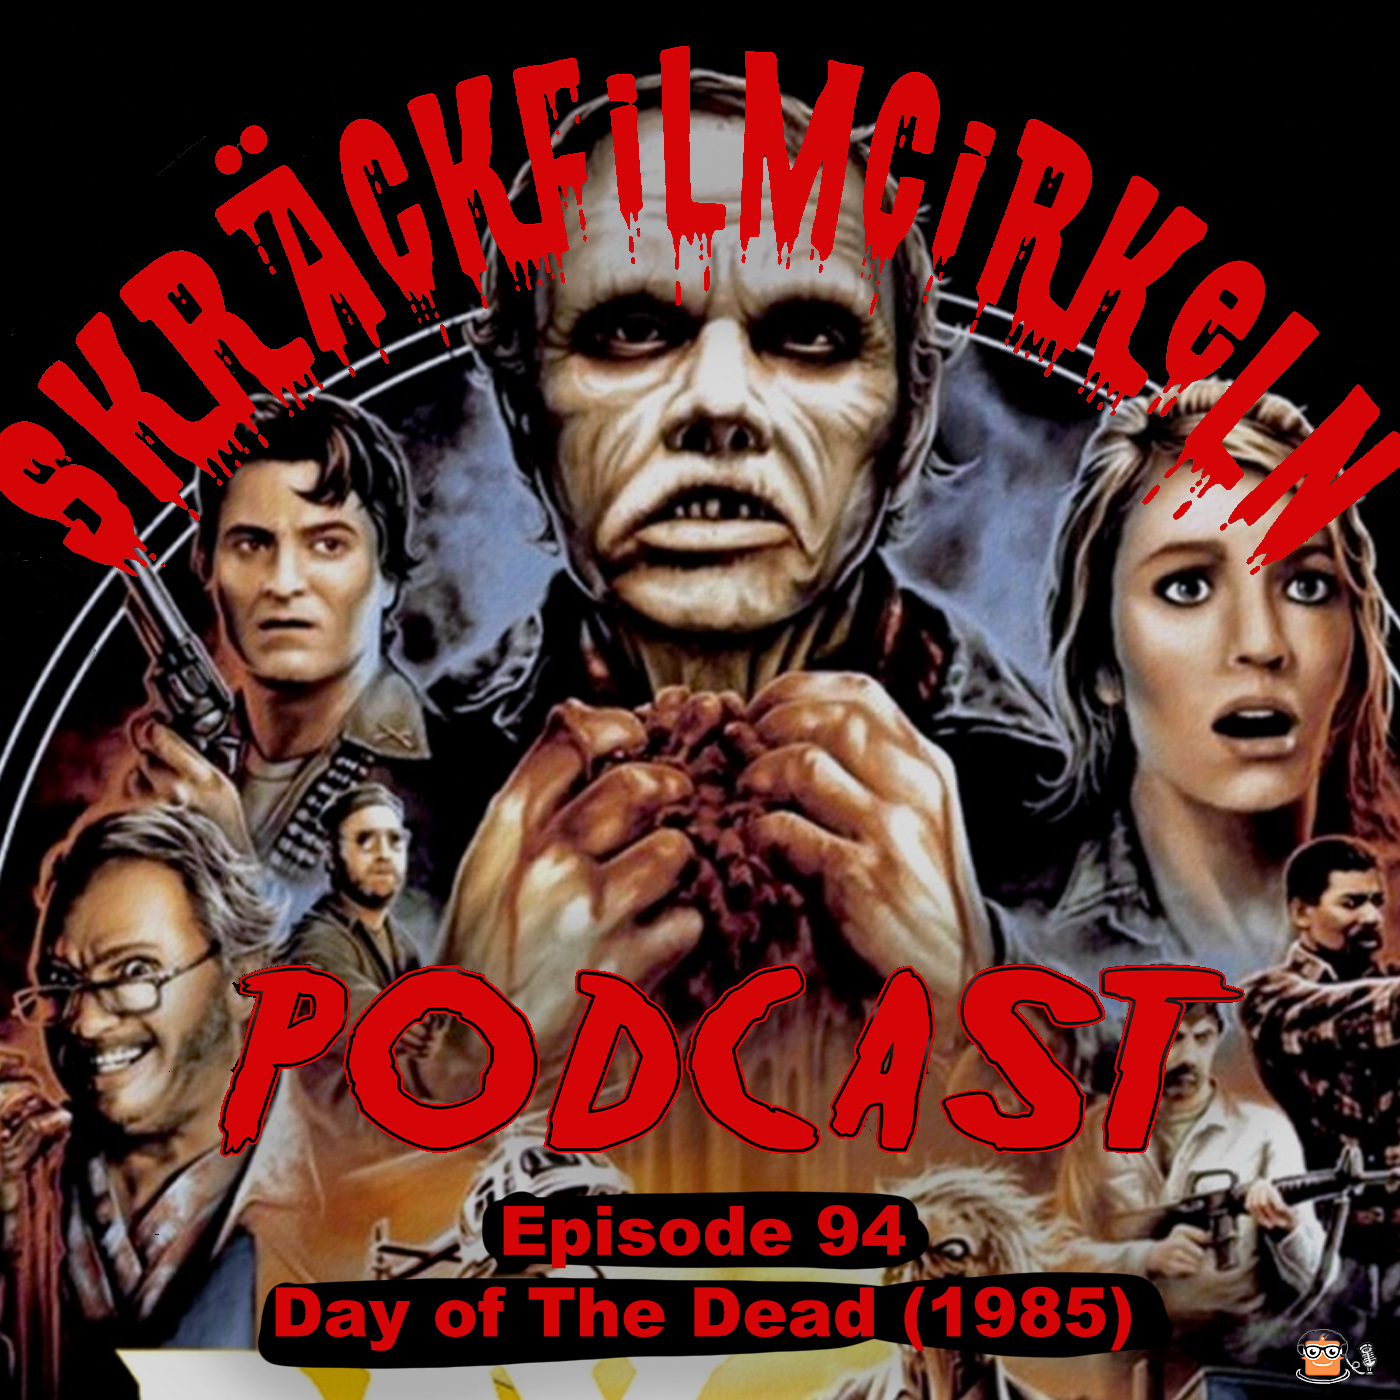 Episode 94 – Day of The Dead (1985)